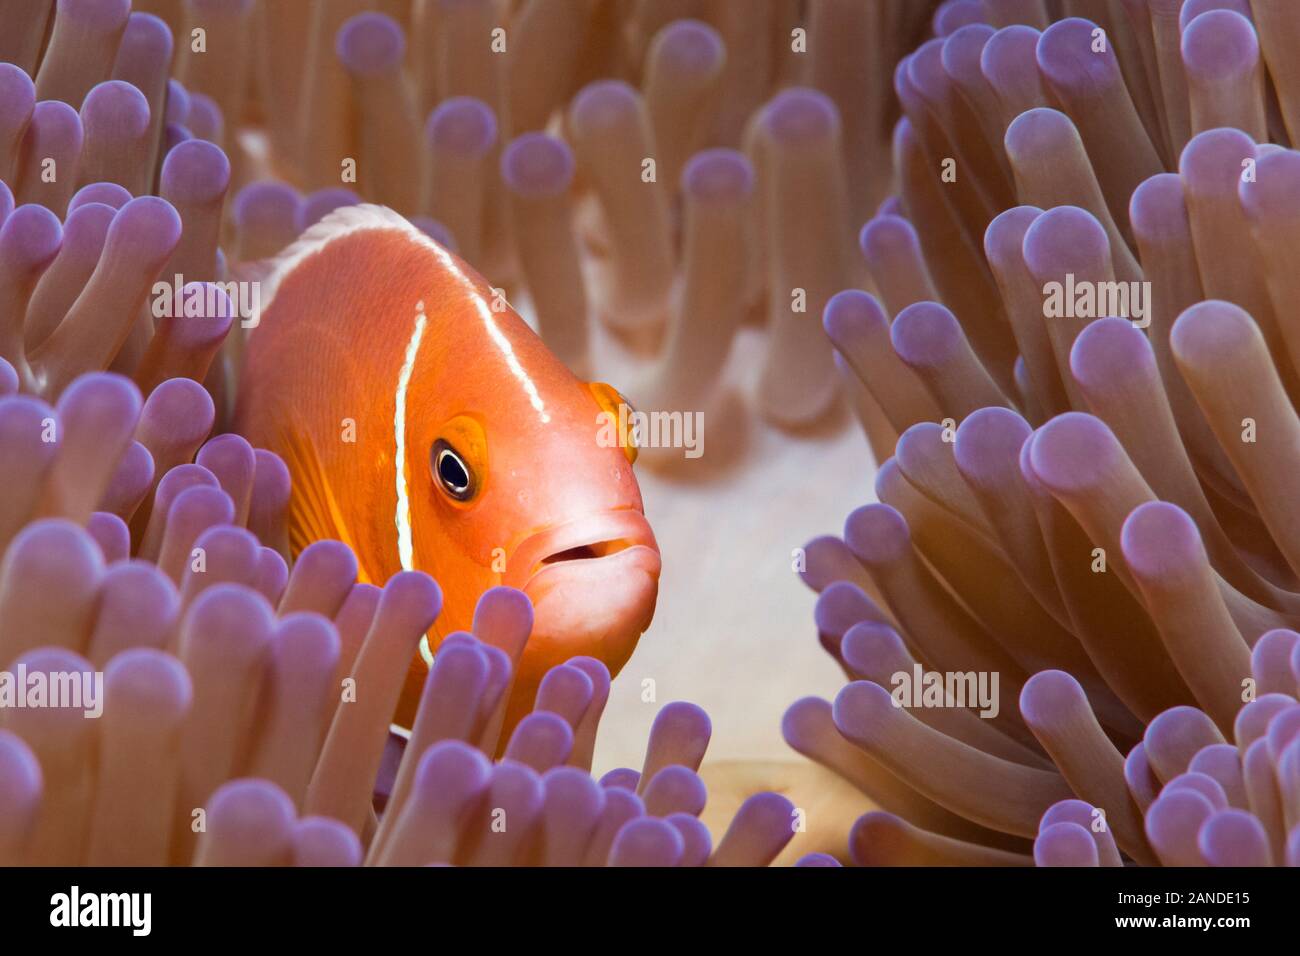 Pink Anemonefish, Amphiprion perideraion, in its host, magnificent sea anemone, Heteractis magnifica, Gau, Lomaiviti, Fiji, South Pacific Ocean Stock Photo